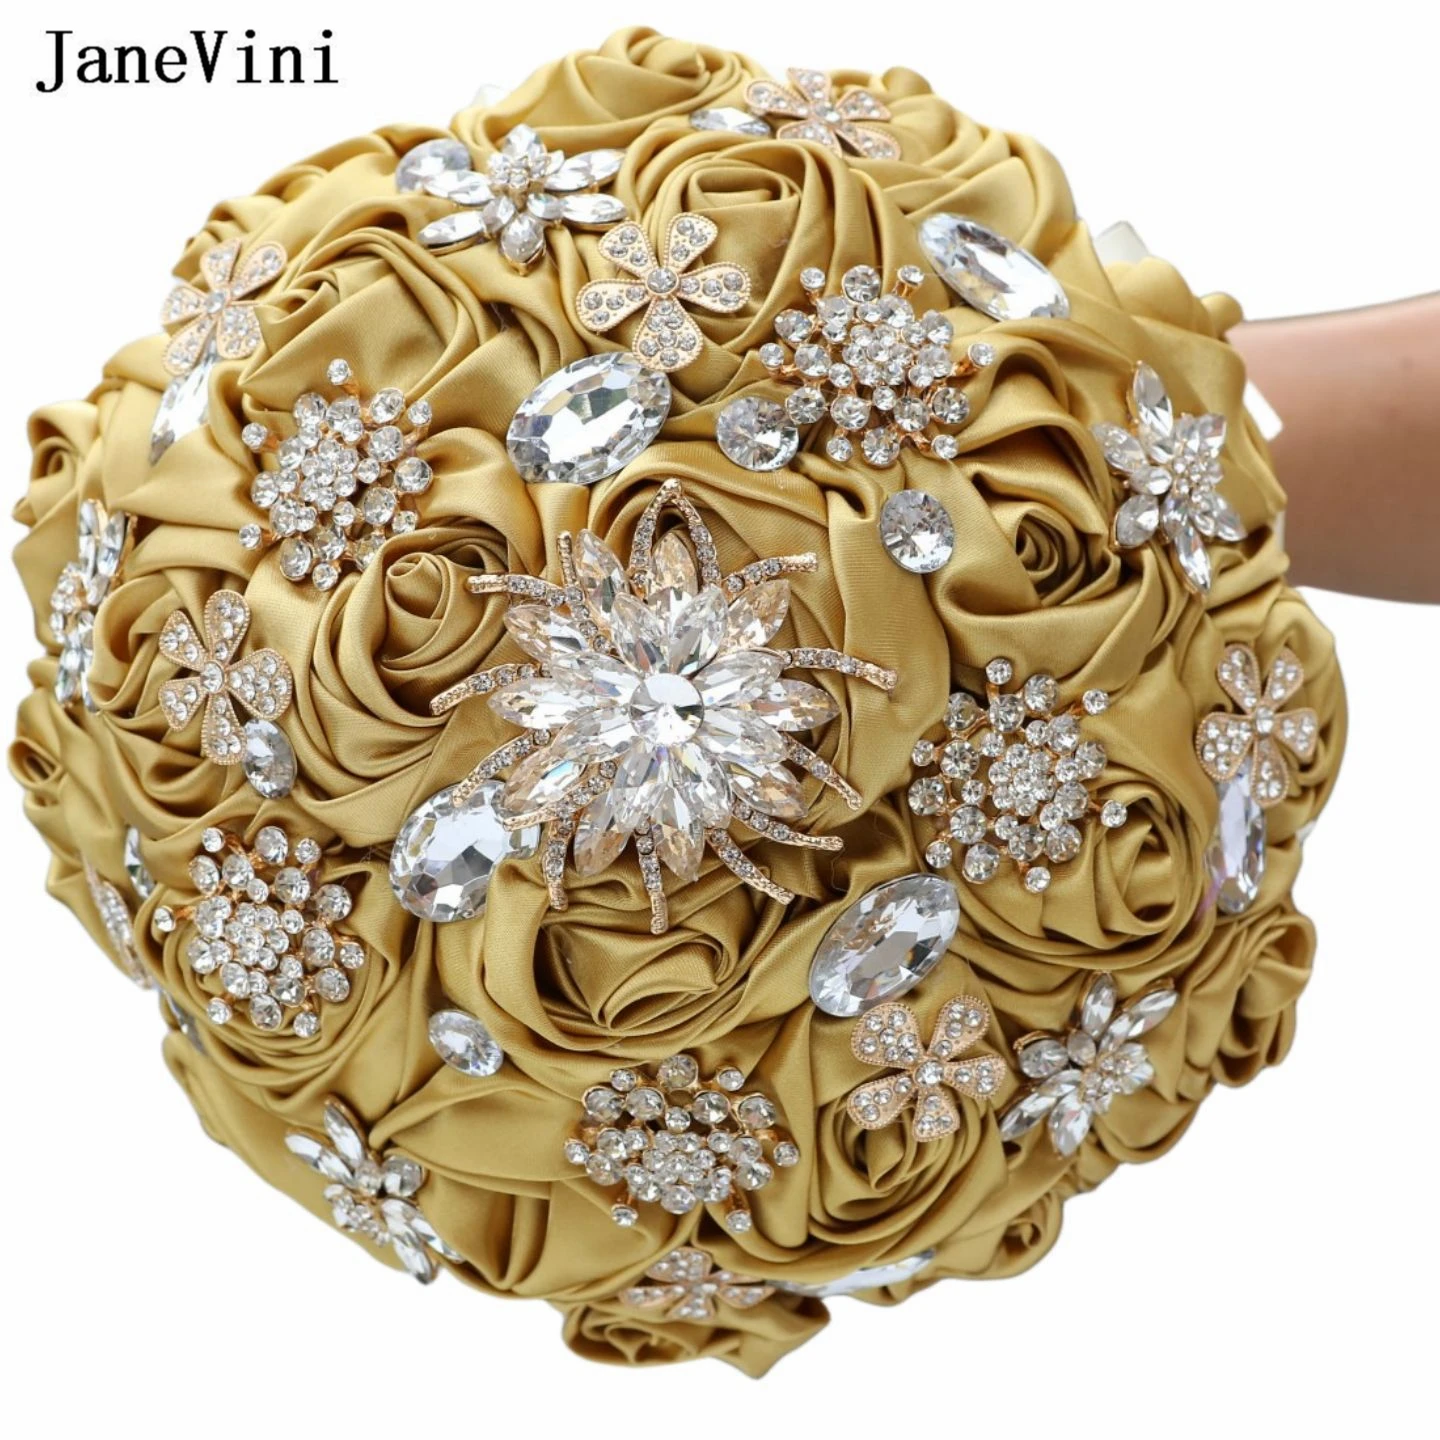 

JaneVini Luxury Light Gold Wedding Bouquets for Bride Bling Crystals Artificial Satin Roses Ribbon Flowers Bridal Brooch Bouquet